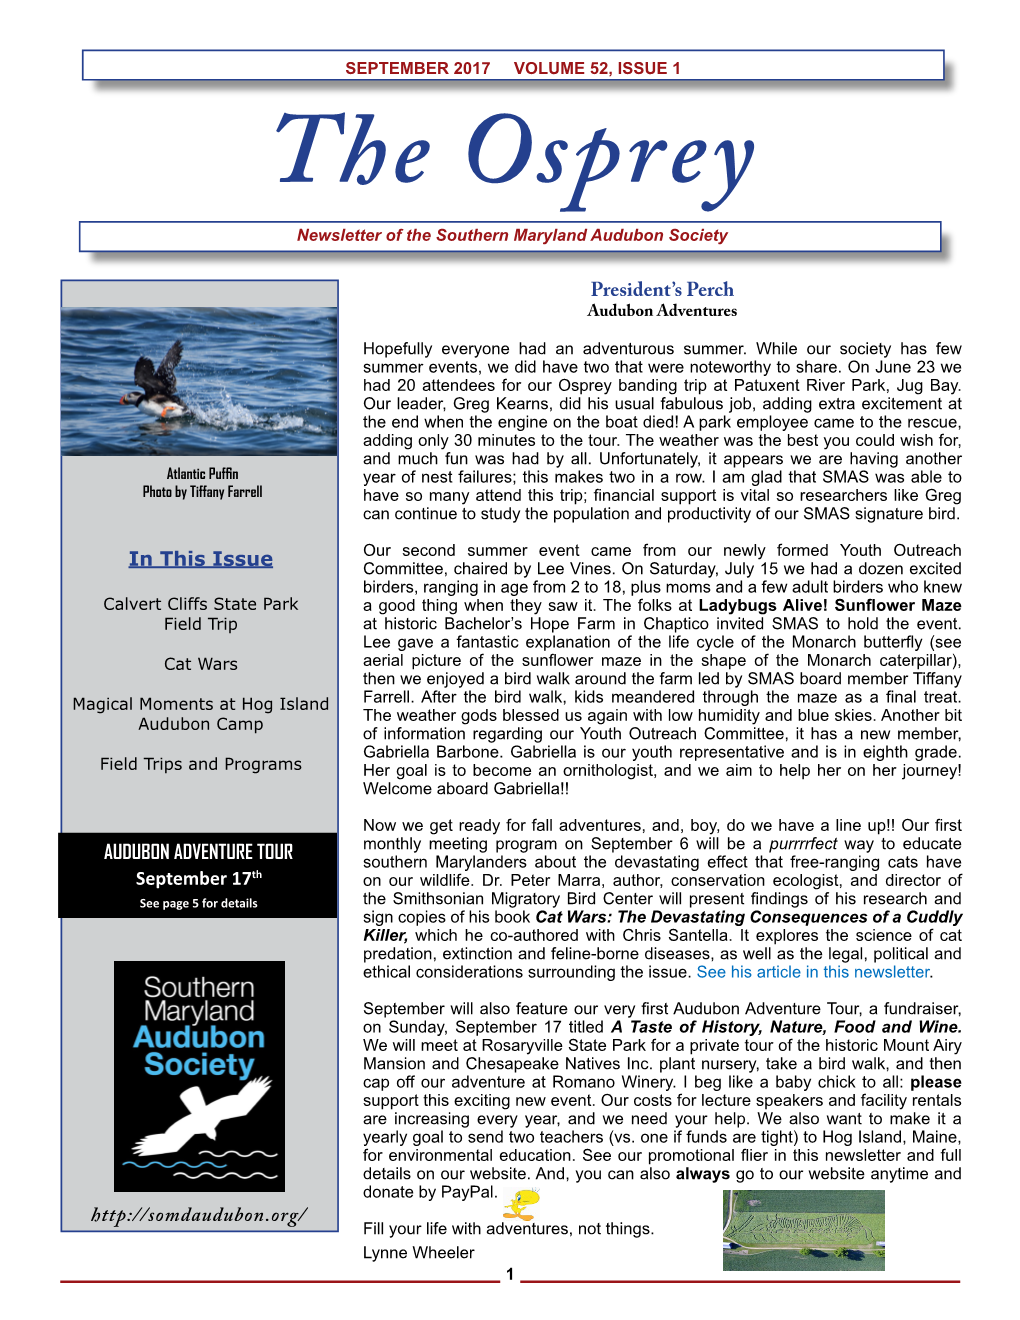 The Osprey: ___ Email Me a Link to Download the Pdf, ___ Email Me a Notice It Is Available on the Website